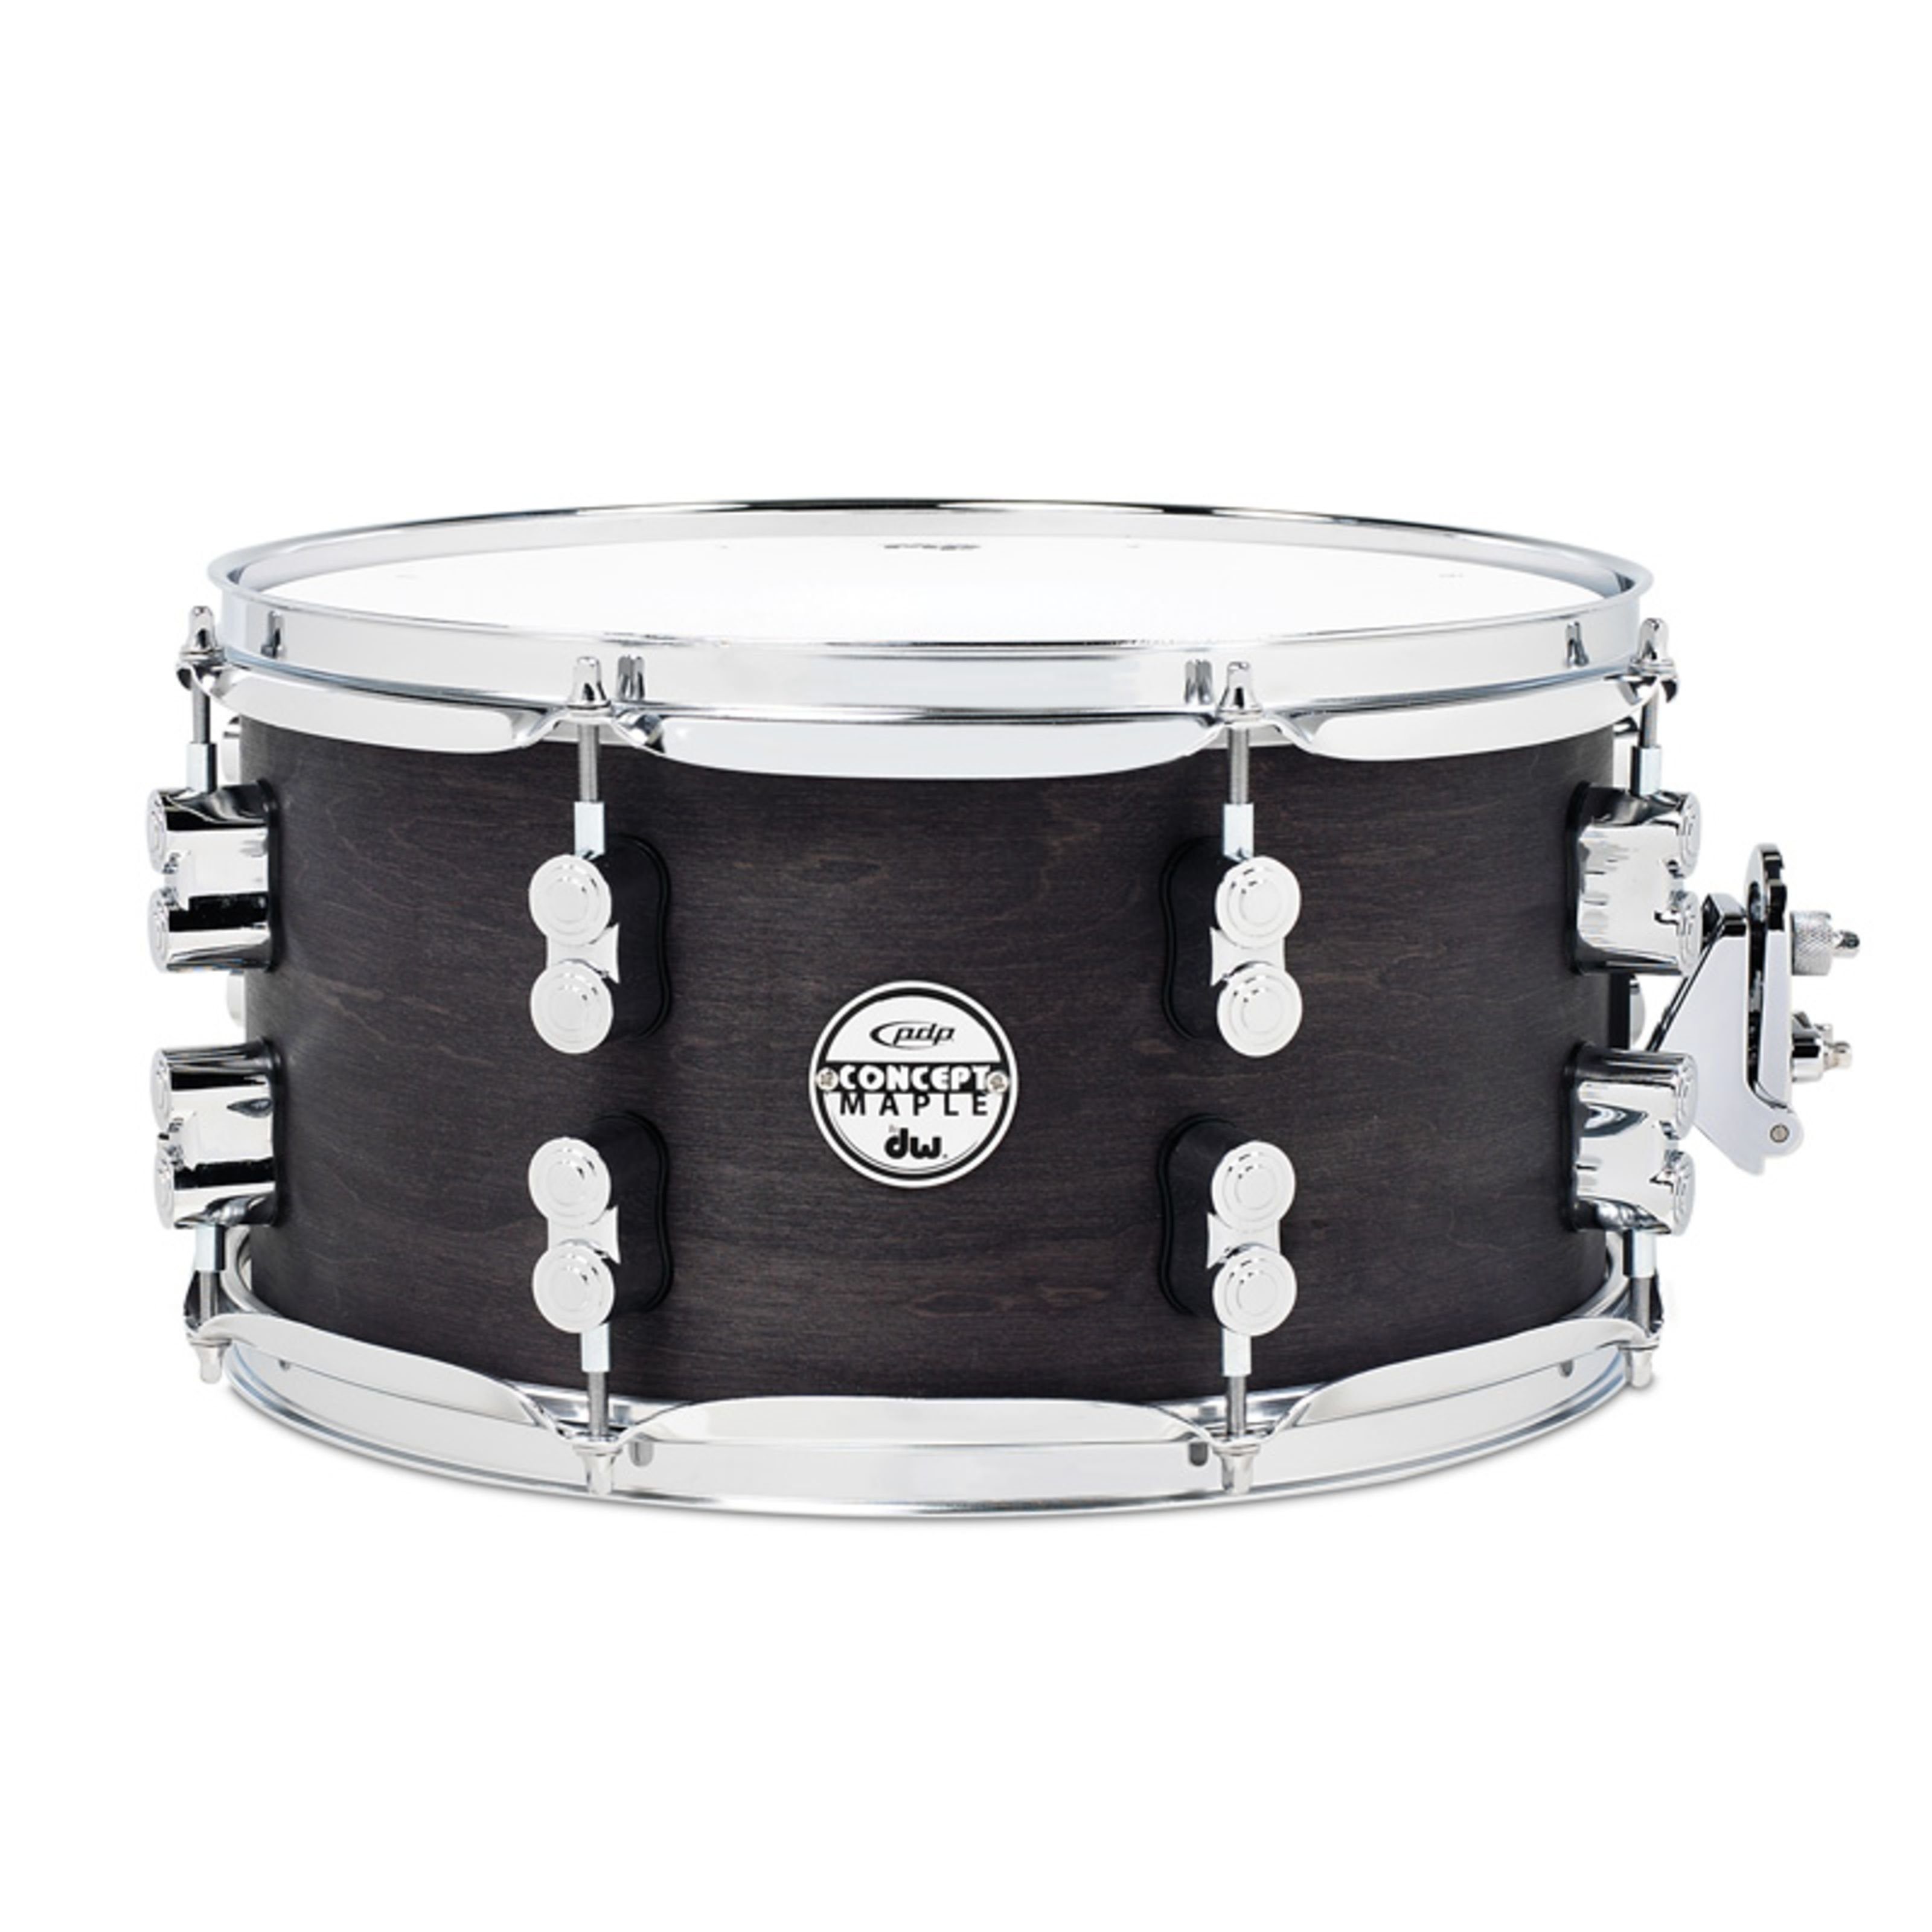 pdp Snare Drum,Black Wax Snare 13"x5,5", Schlagzeuge, Snare Drums, Black Wax Snare 13"x5,5" - Snare Drum